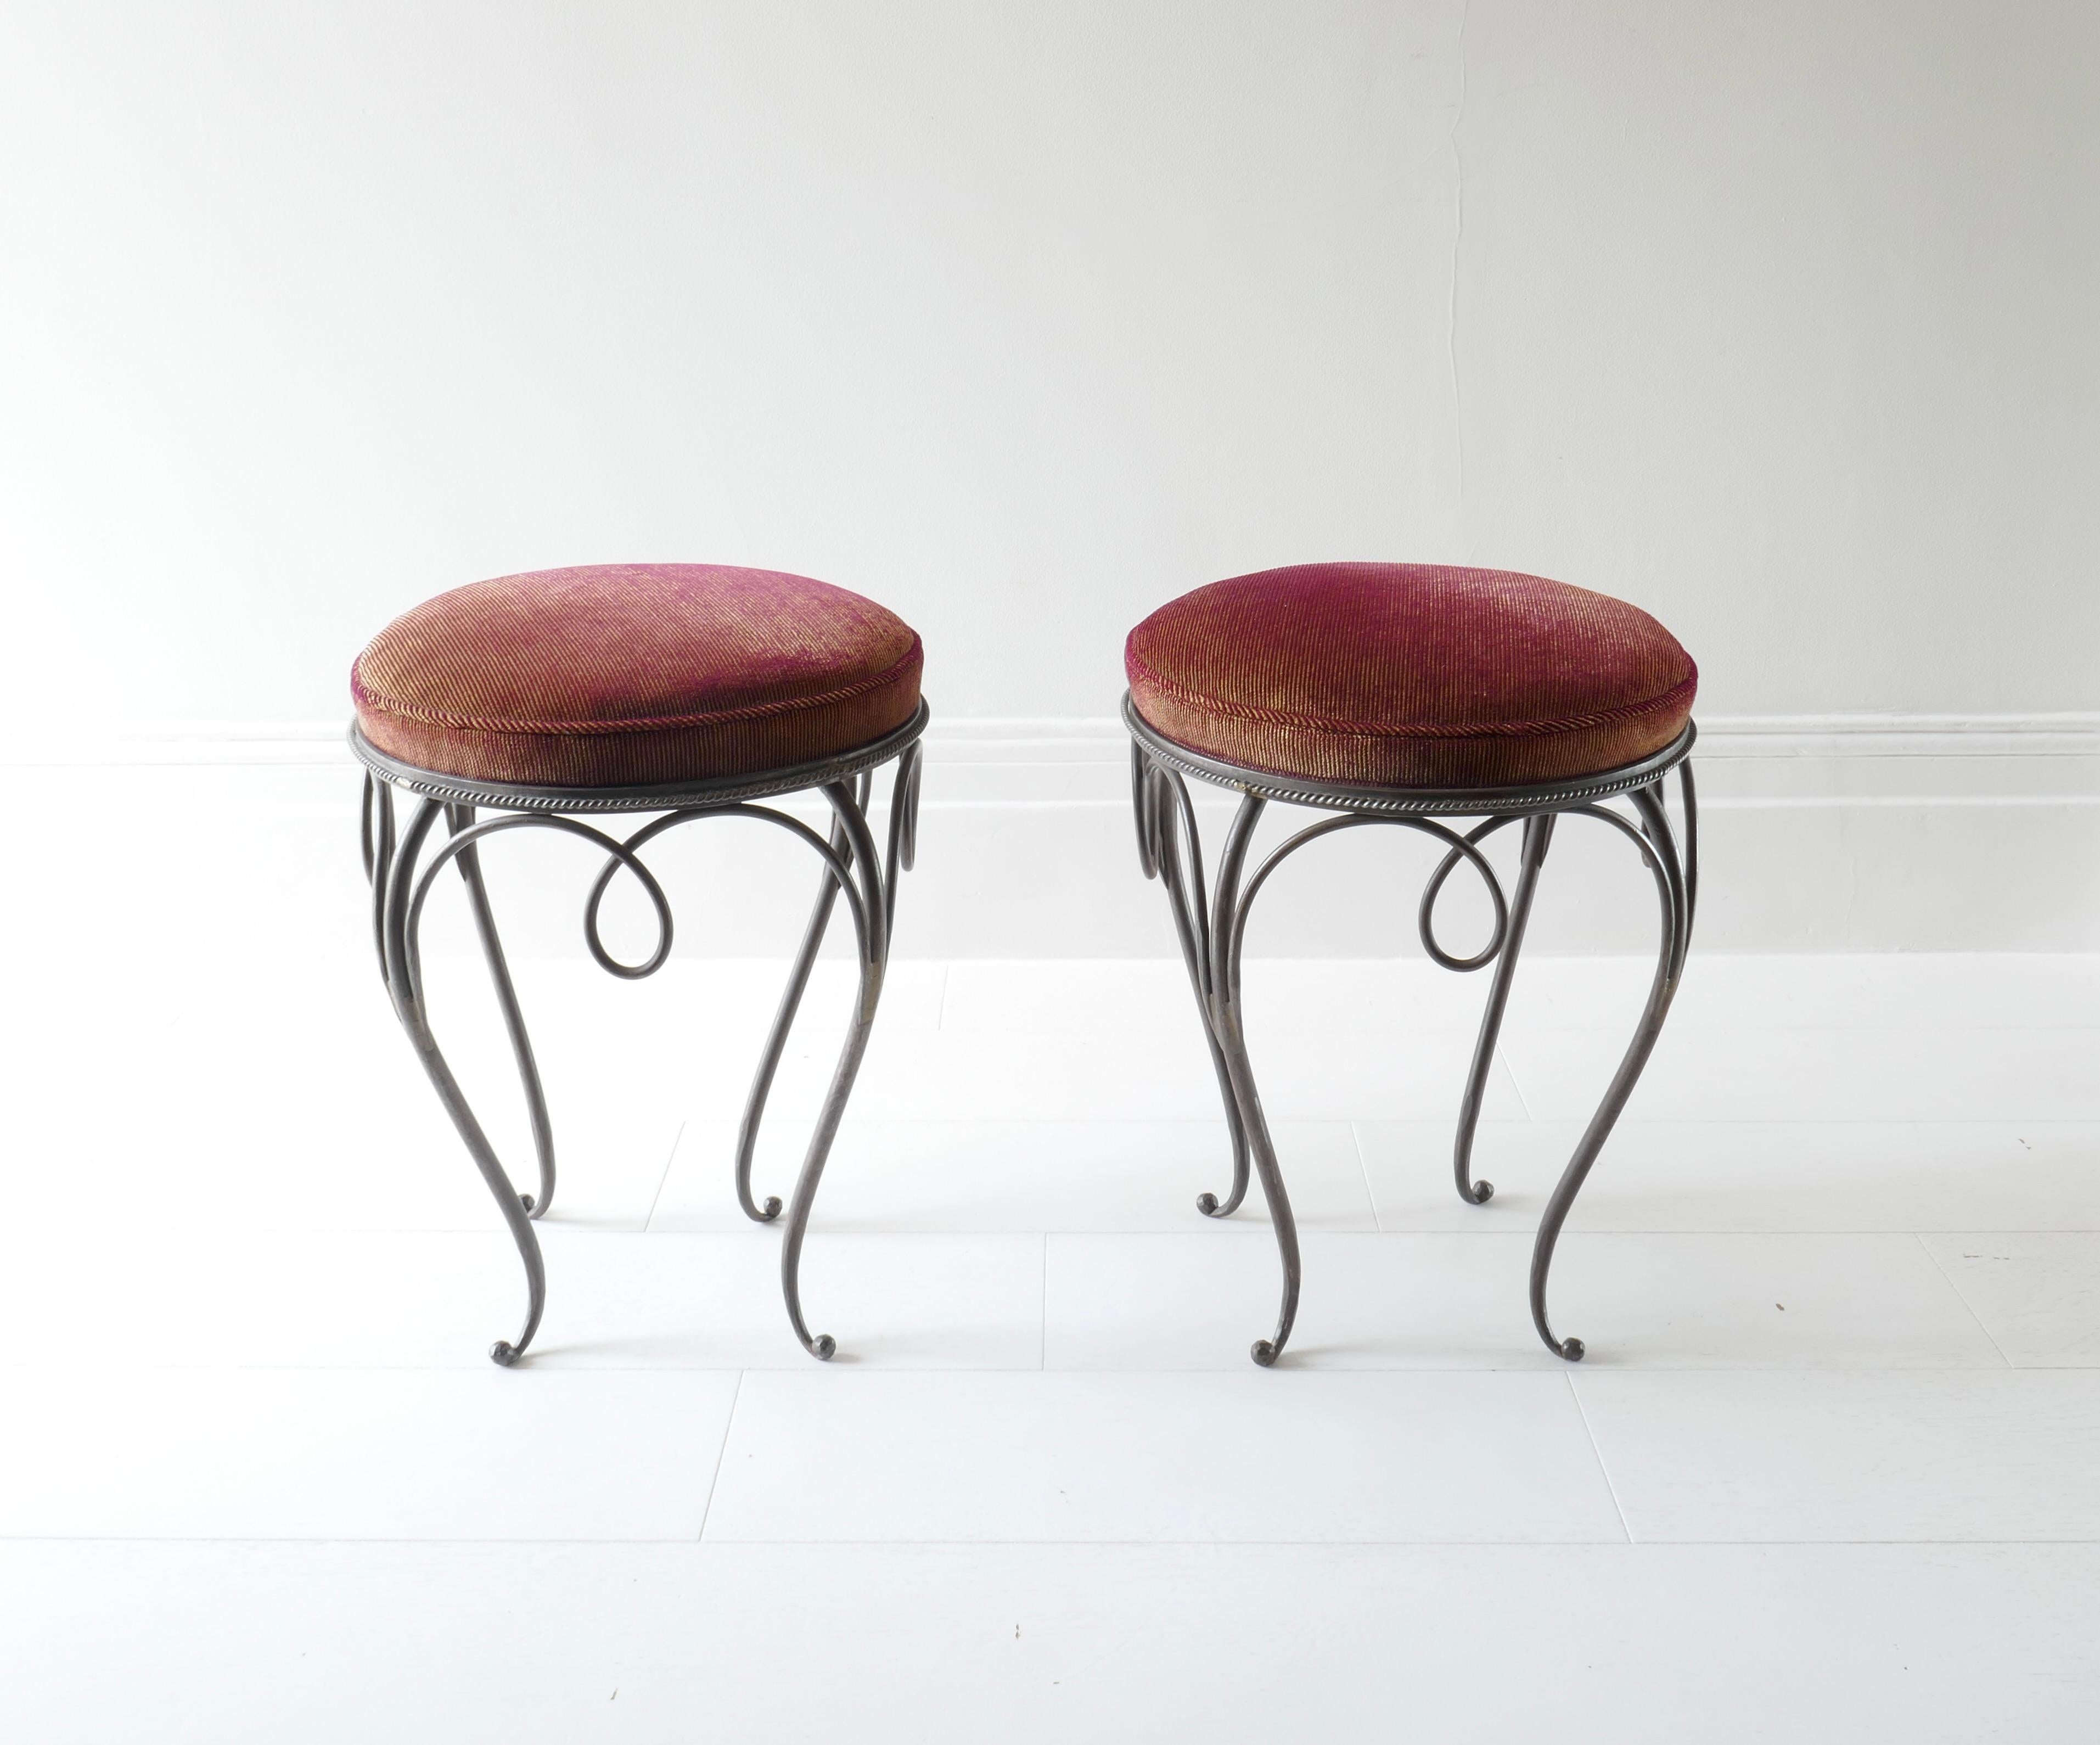 Pair of round iron stools in the style of René Drouet and René Prou. The iron base features cabriole legs. The seats have been reupholstered in a delicate striped burgundy and green velvet.
Perfect under a small table or vanity unit.
Seat height